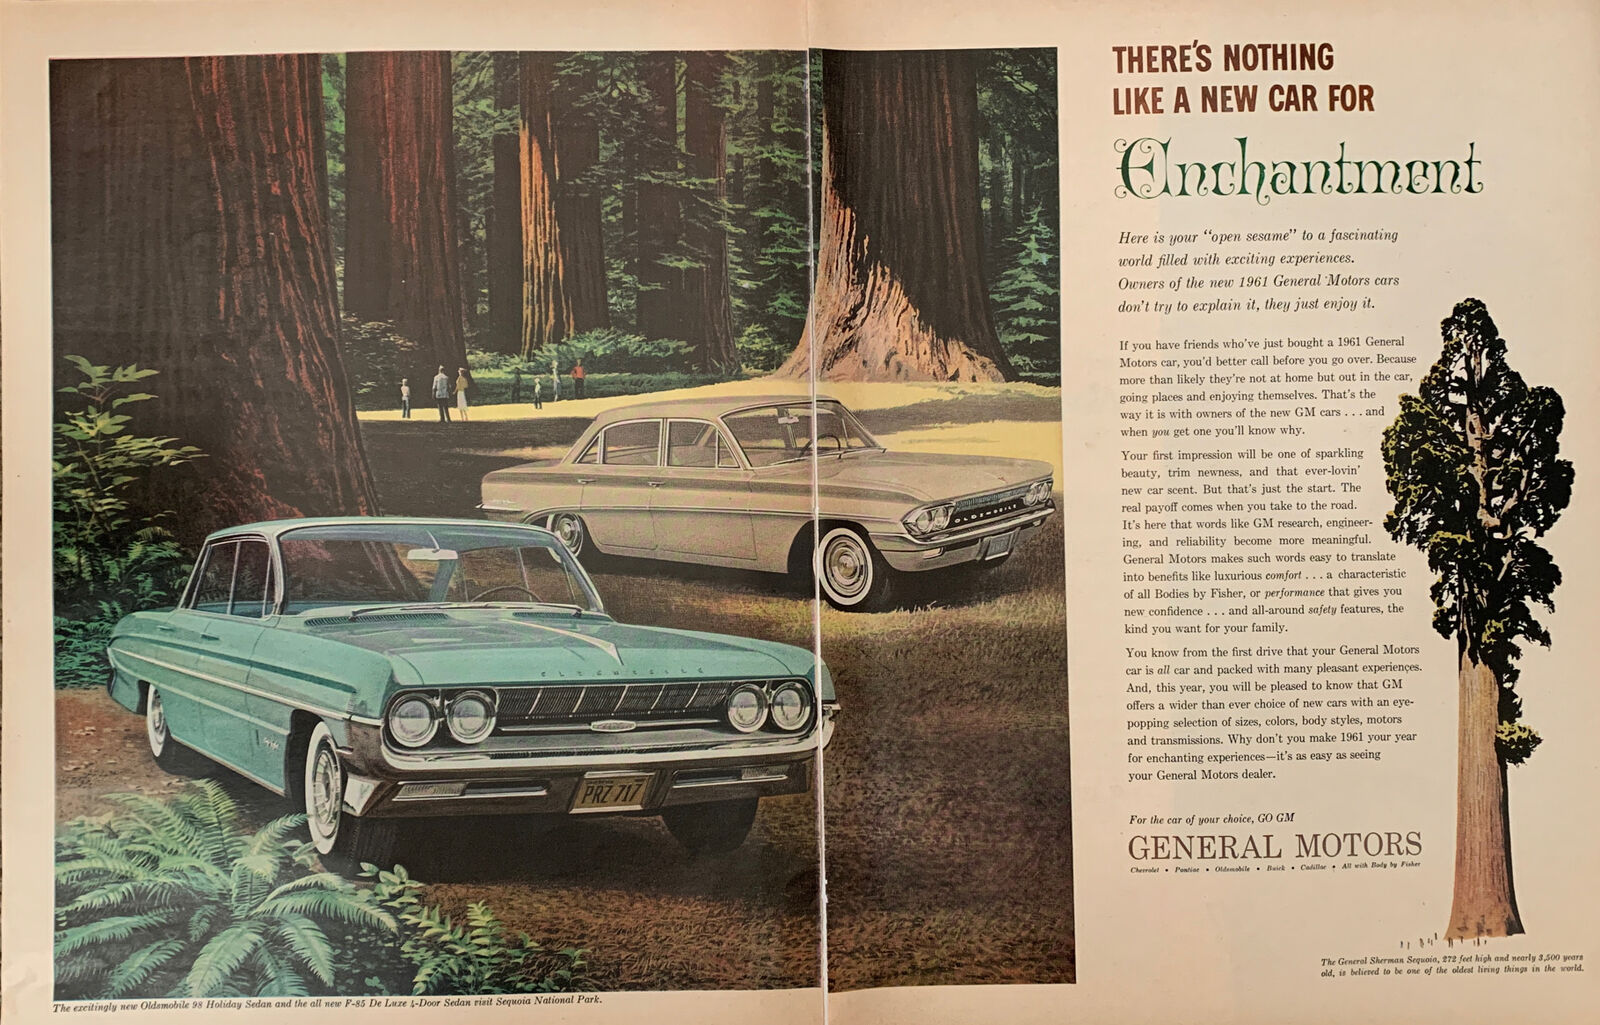 1960 vintage general motors Double Page print ad. There's Nothing Like A New Car